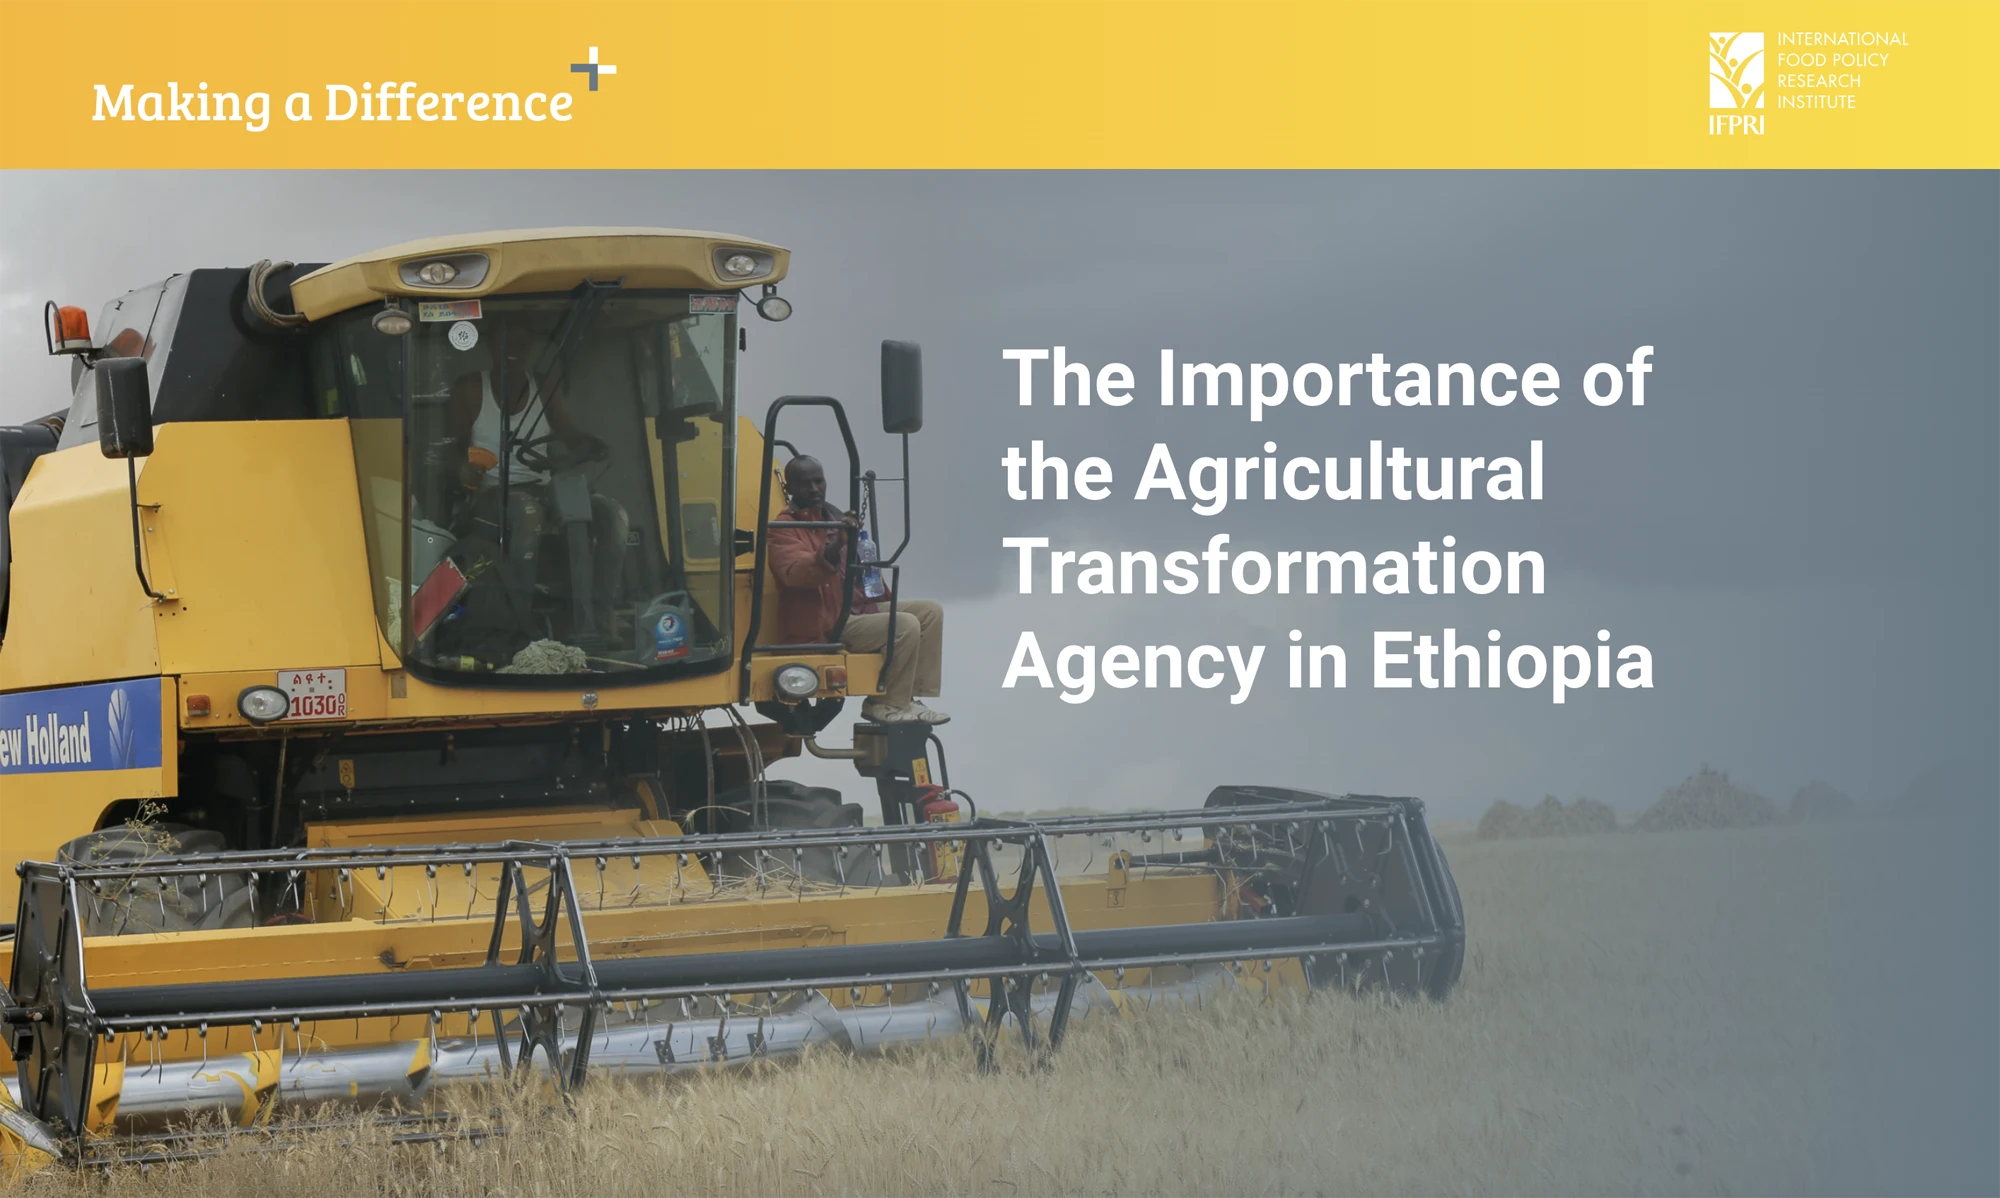 The importance of the agricultural transformation agency in Ethiopia